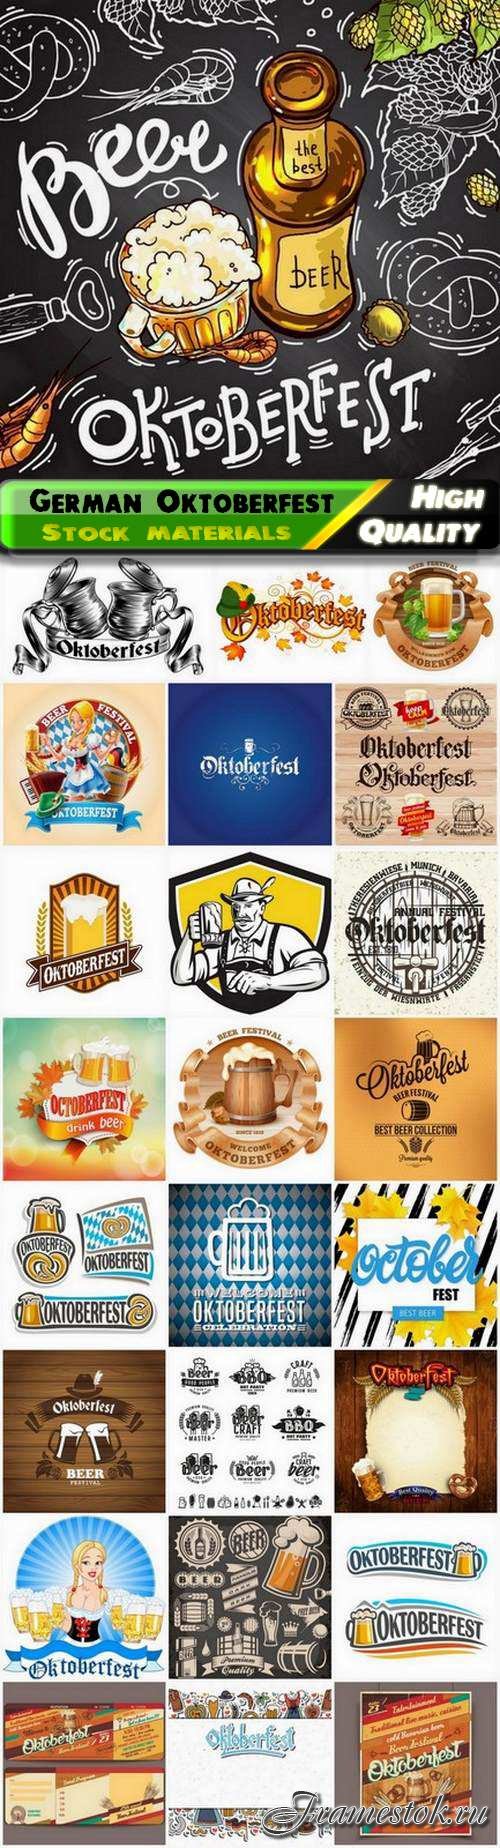 Autumn German Oktoberfest with beer mugs and bottles - 25 Eps